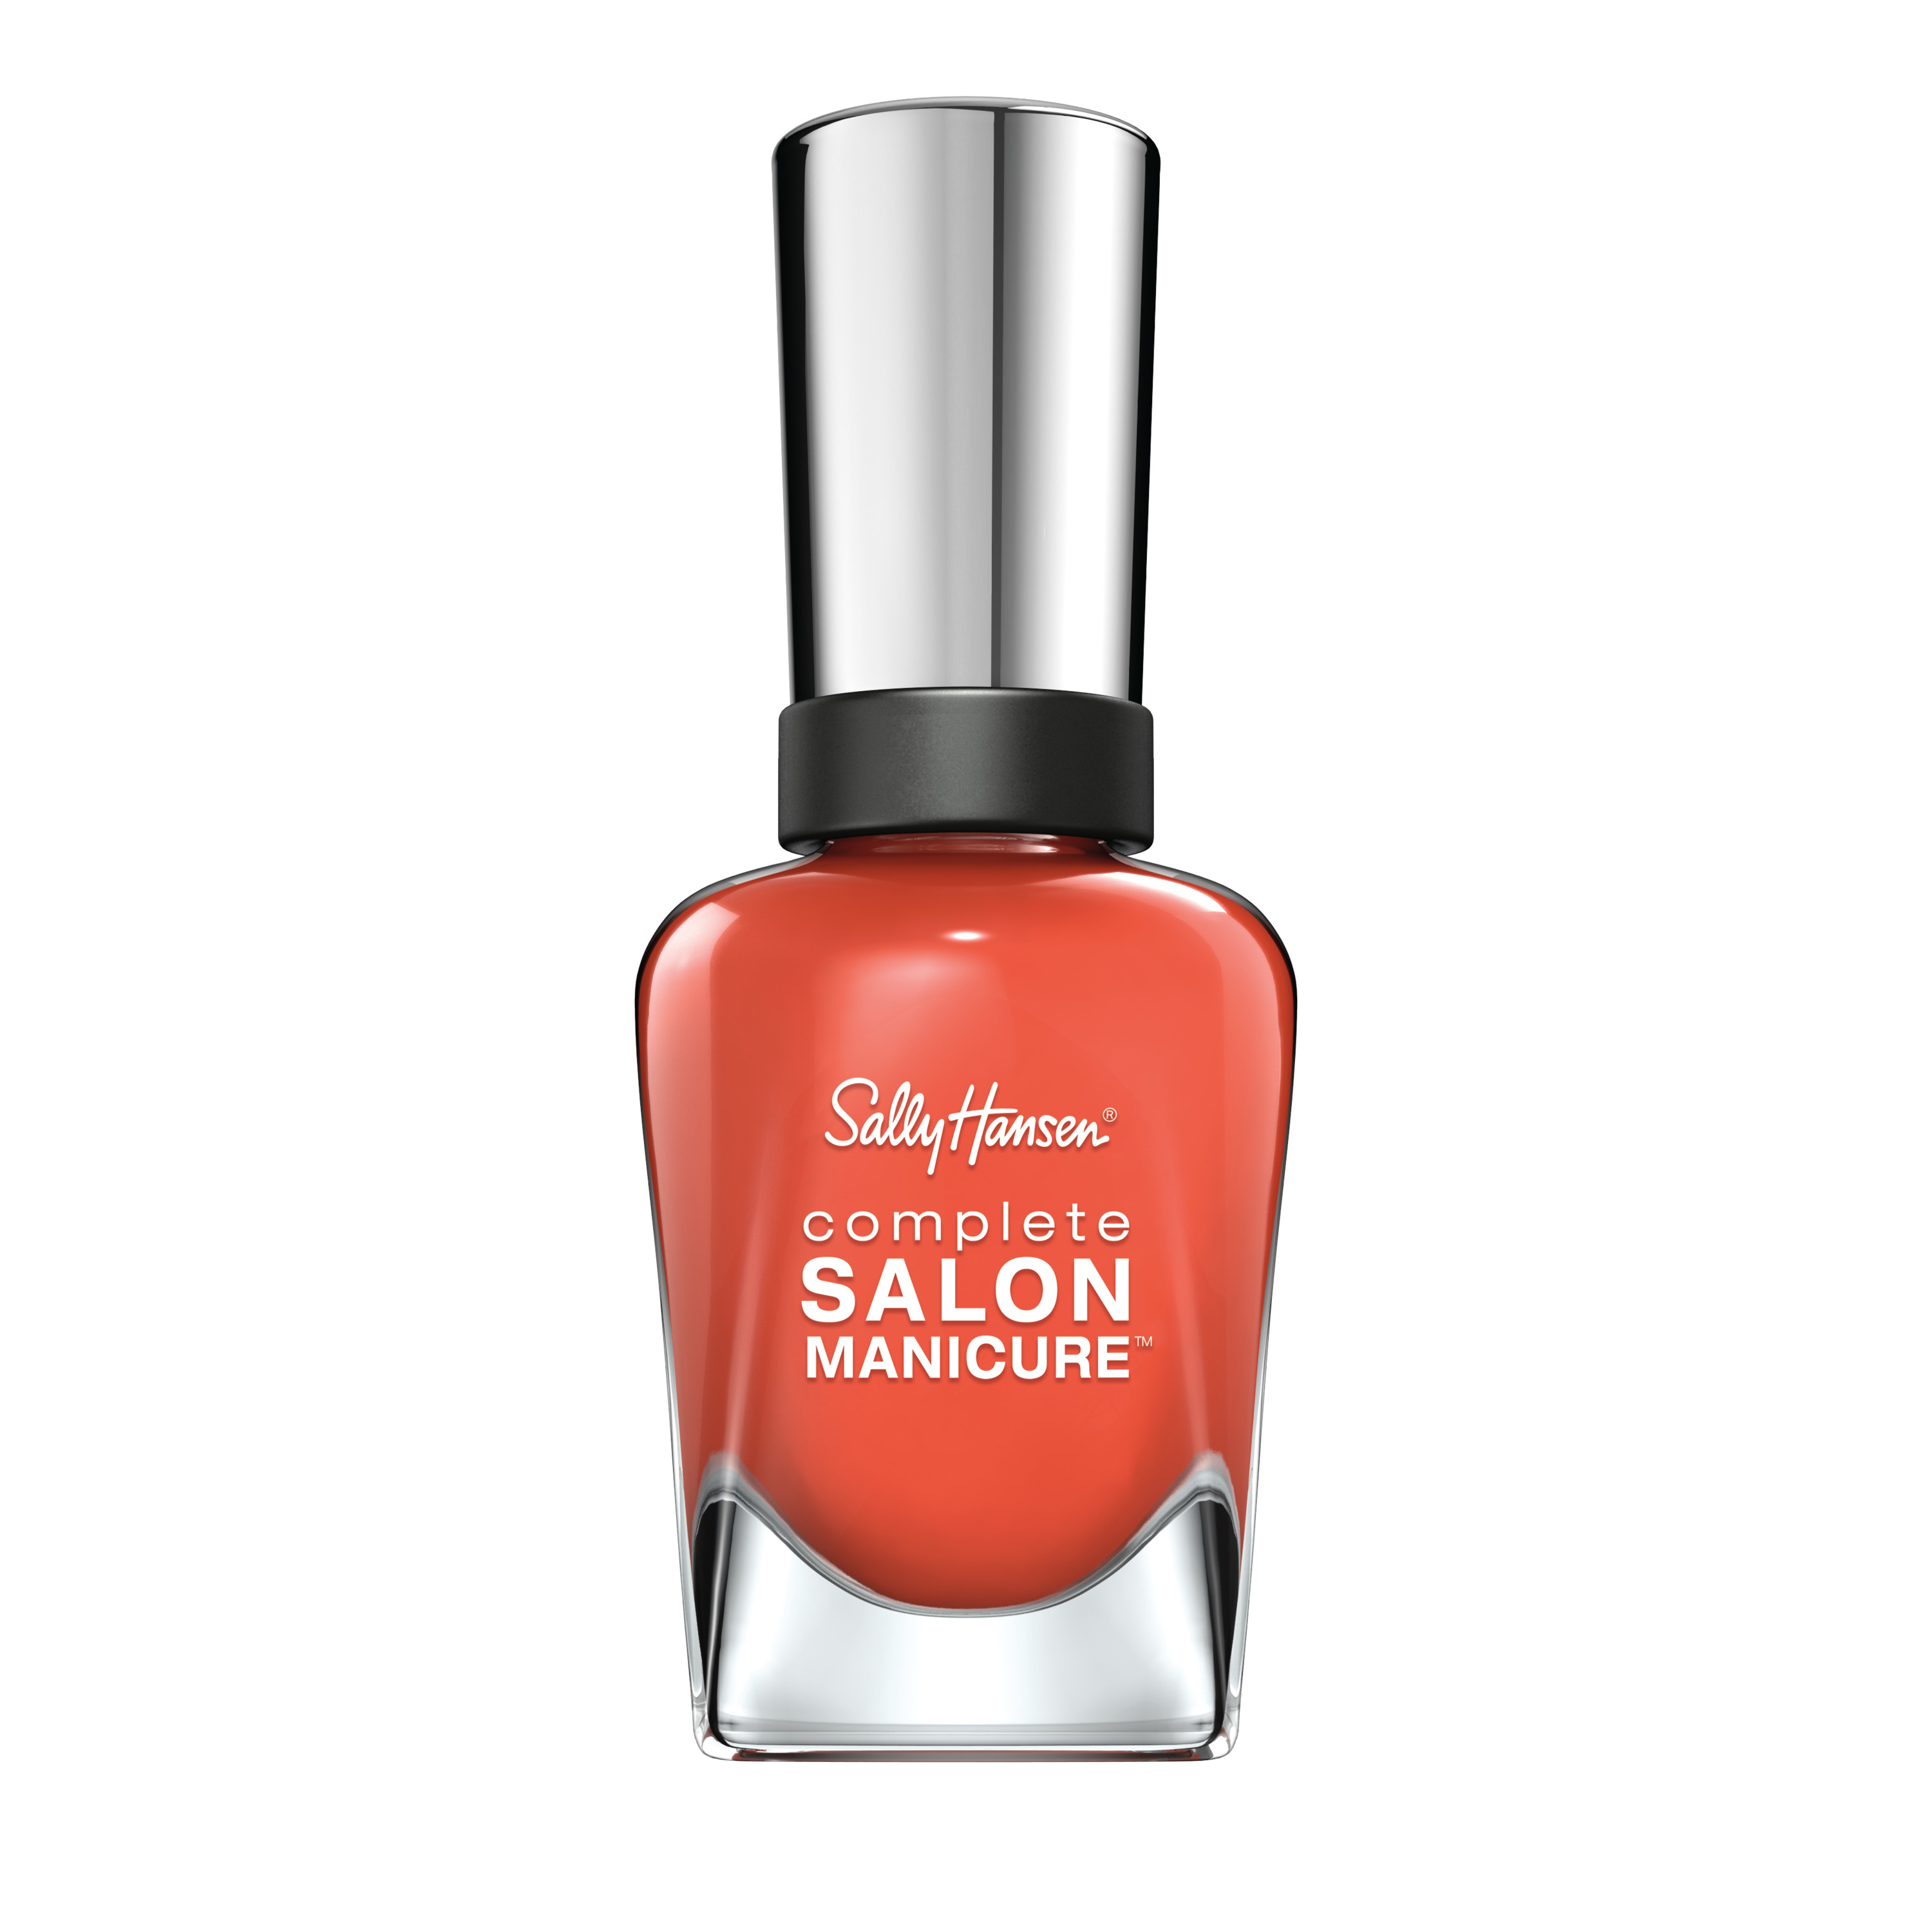 Sally Hansen Complete Salon Manicure Nail Color, Poof! Be-gonia - image 1 of 3